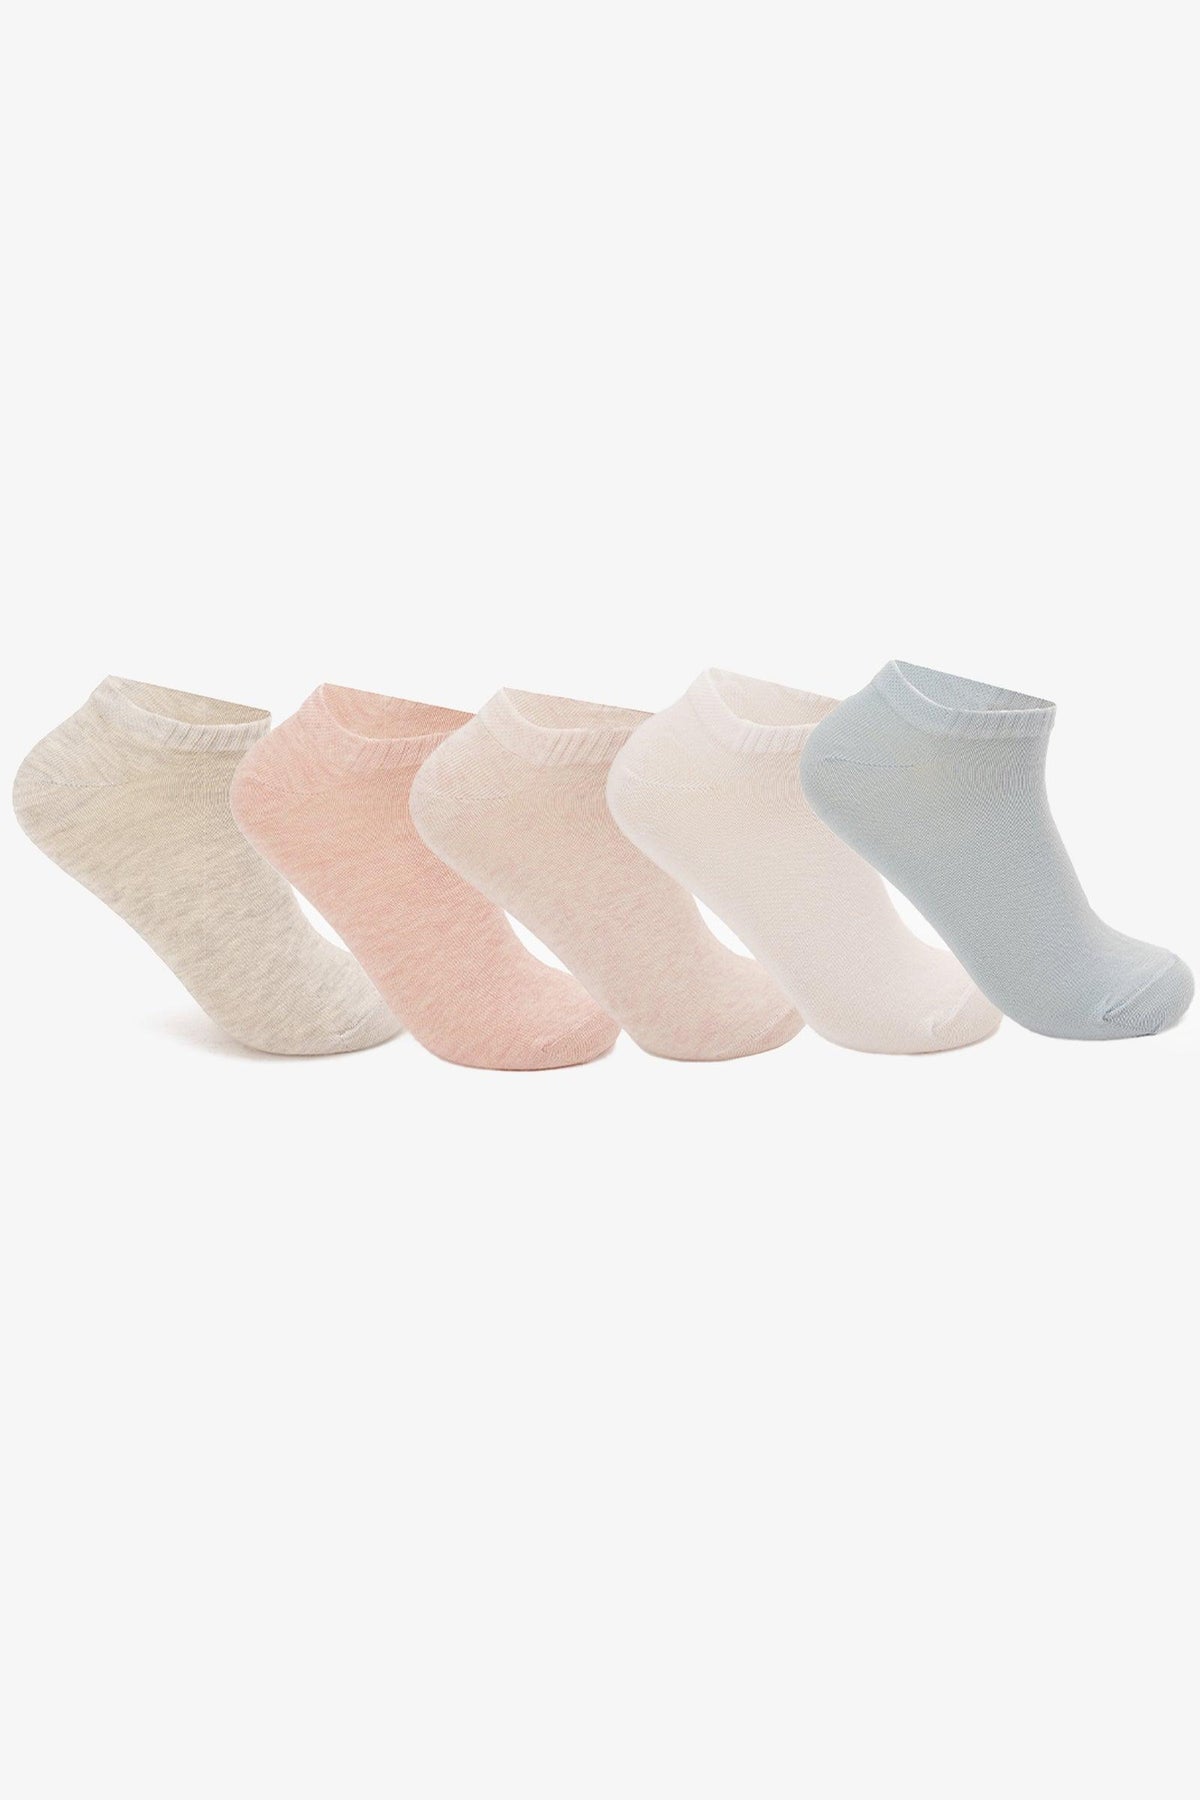 Cotton Ankle Socks - 5 Pairs